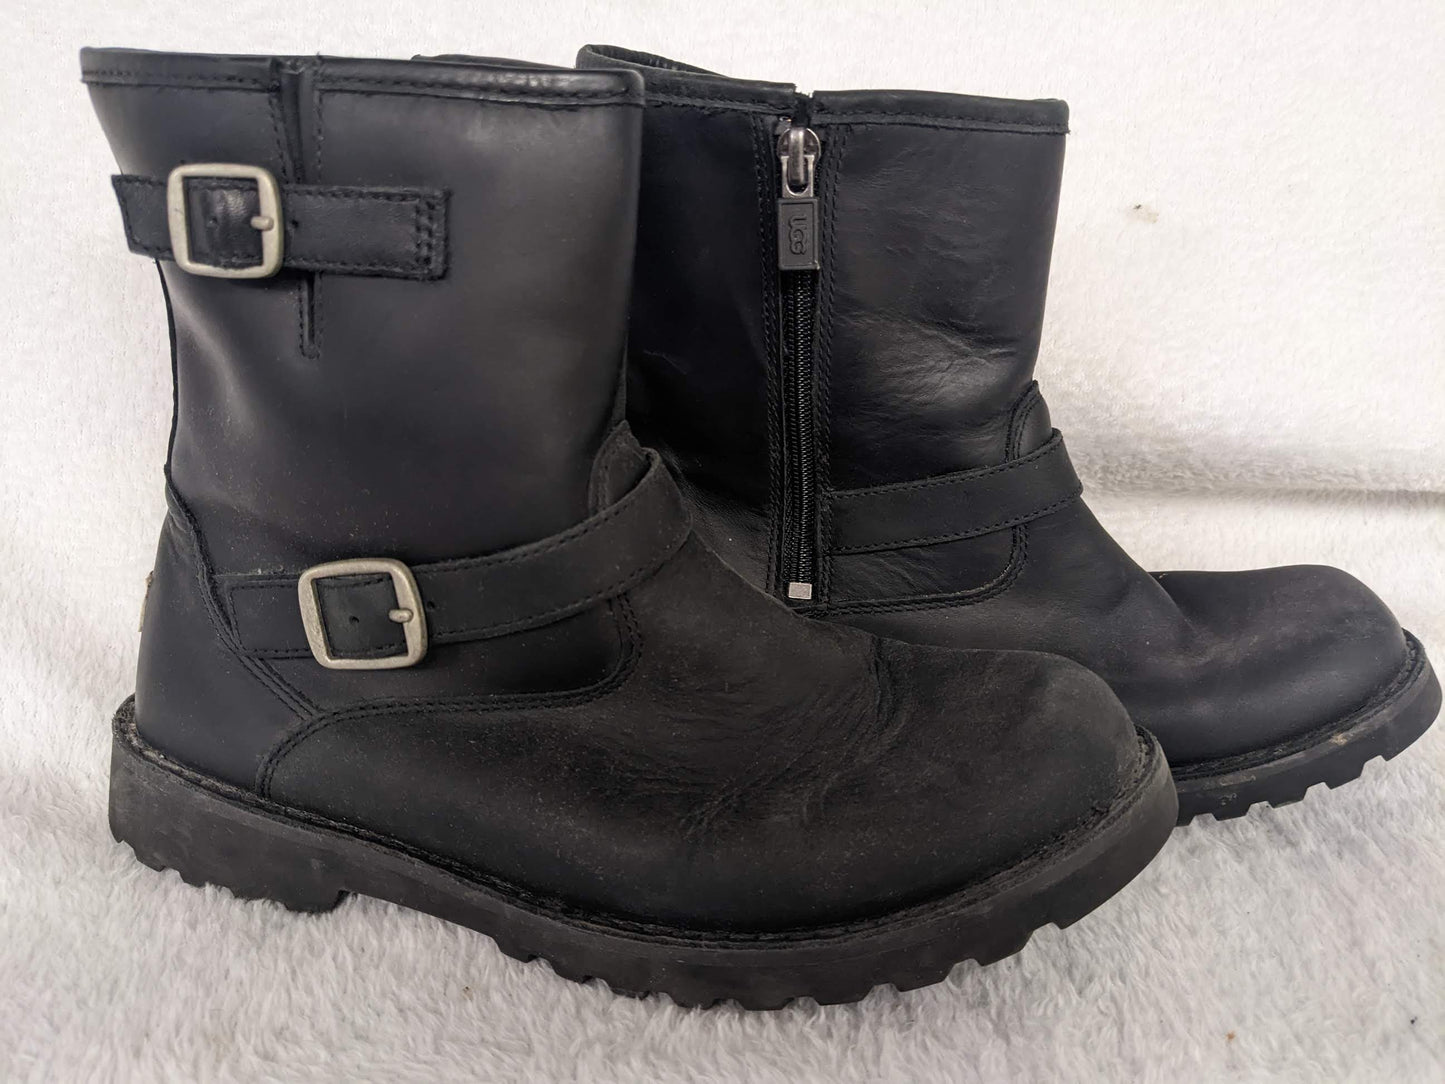 Ugg Winter Boots Size 5 Color Black Condition Used